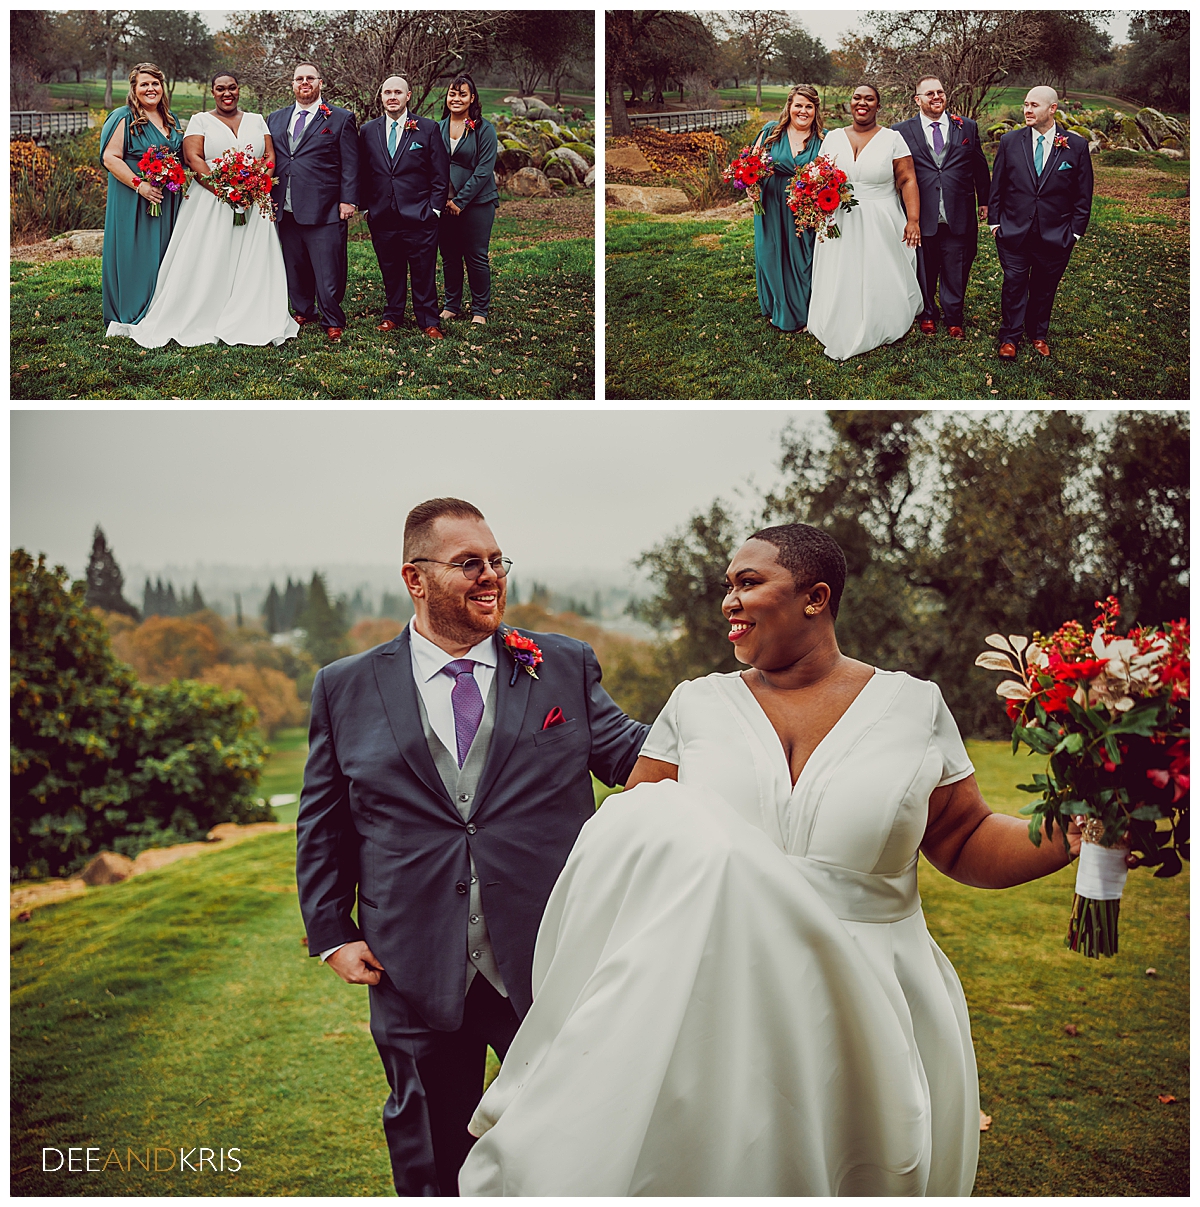 Three images: Top left image of wedding party outdoors in classic post. Top right image of wedding party walking towards camera. Bottom image of groom helping bride walk across the lawn toward camera.